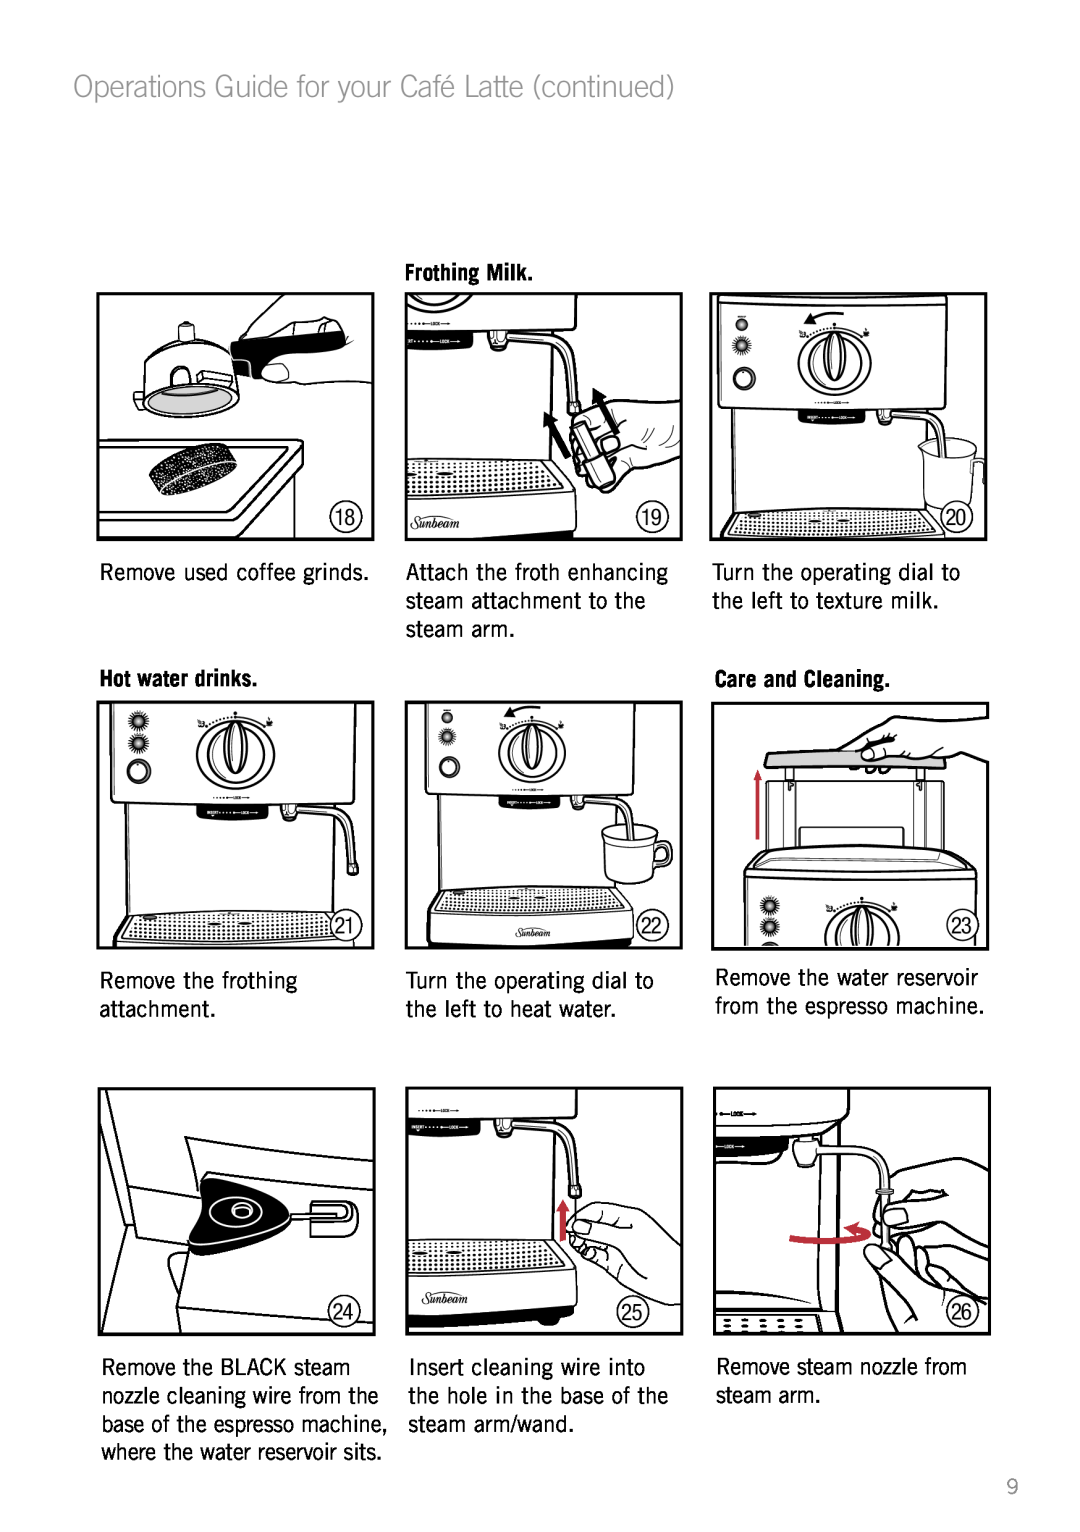 Sunbeam EM5400B manual Operations Guide for your Café Latte continued, Remove used coffee grinds 